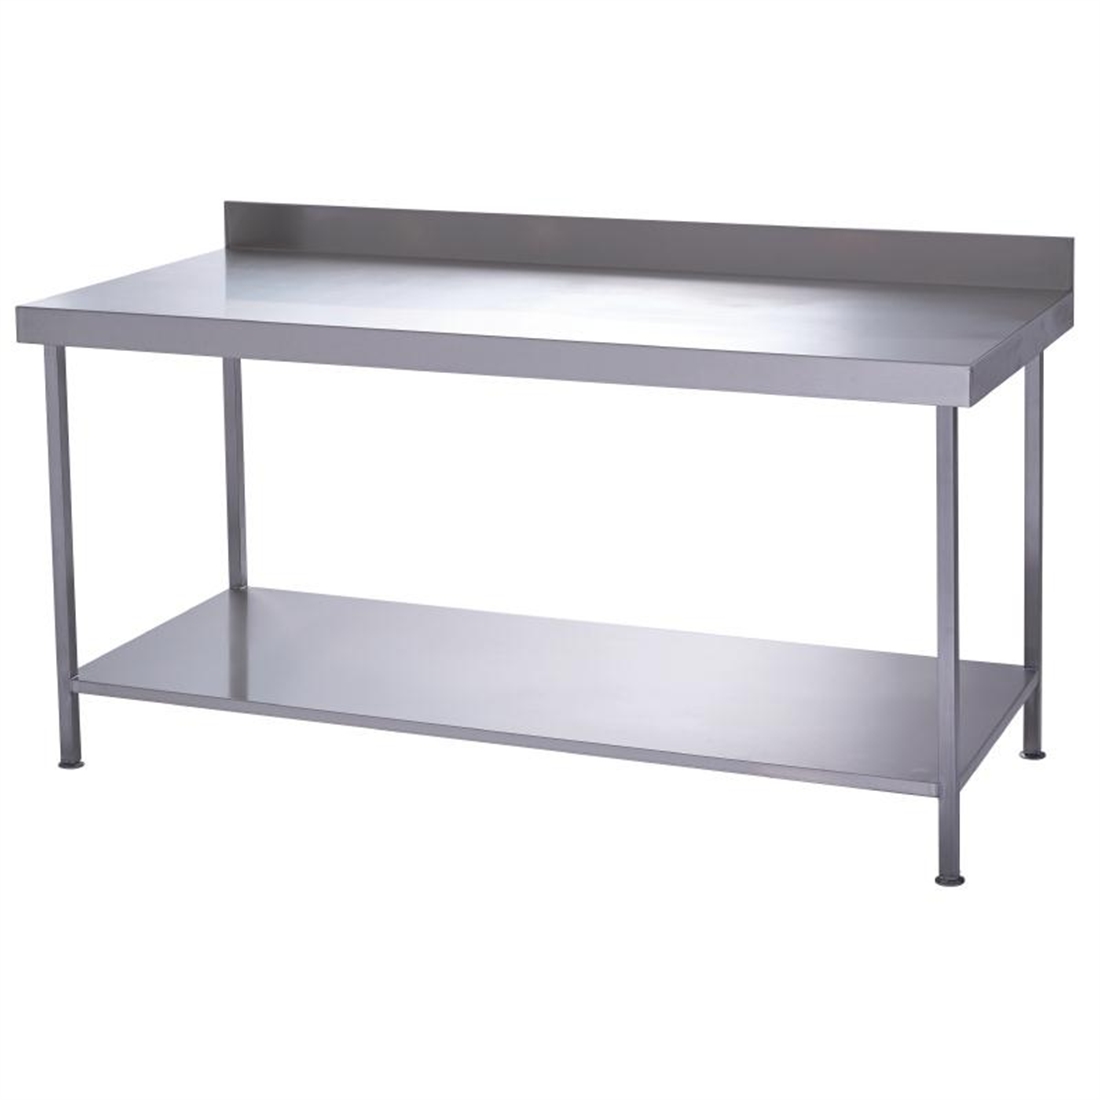 Parry Fully Welded Stainless Steel Wall Table with Undershelf 1000x700mm